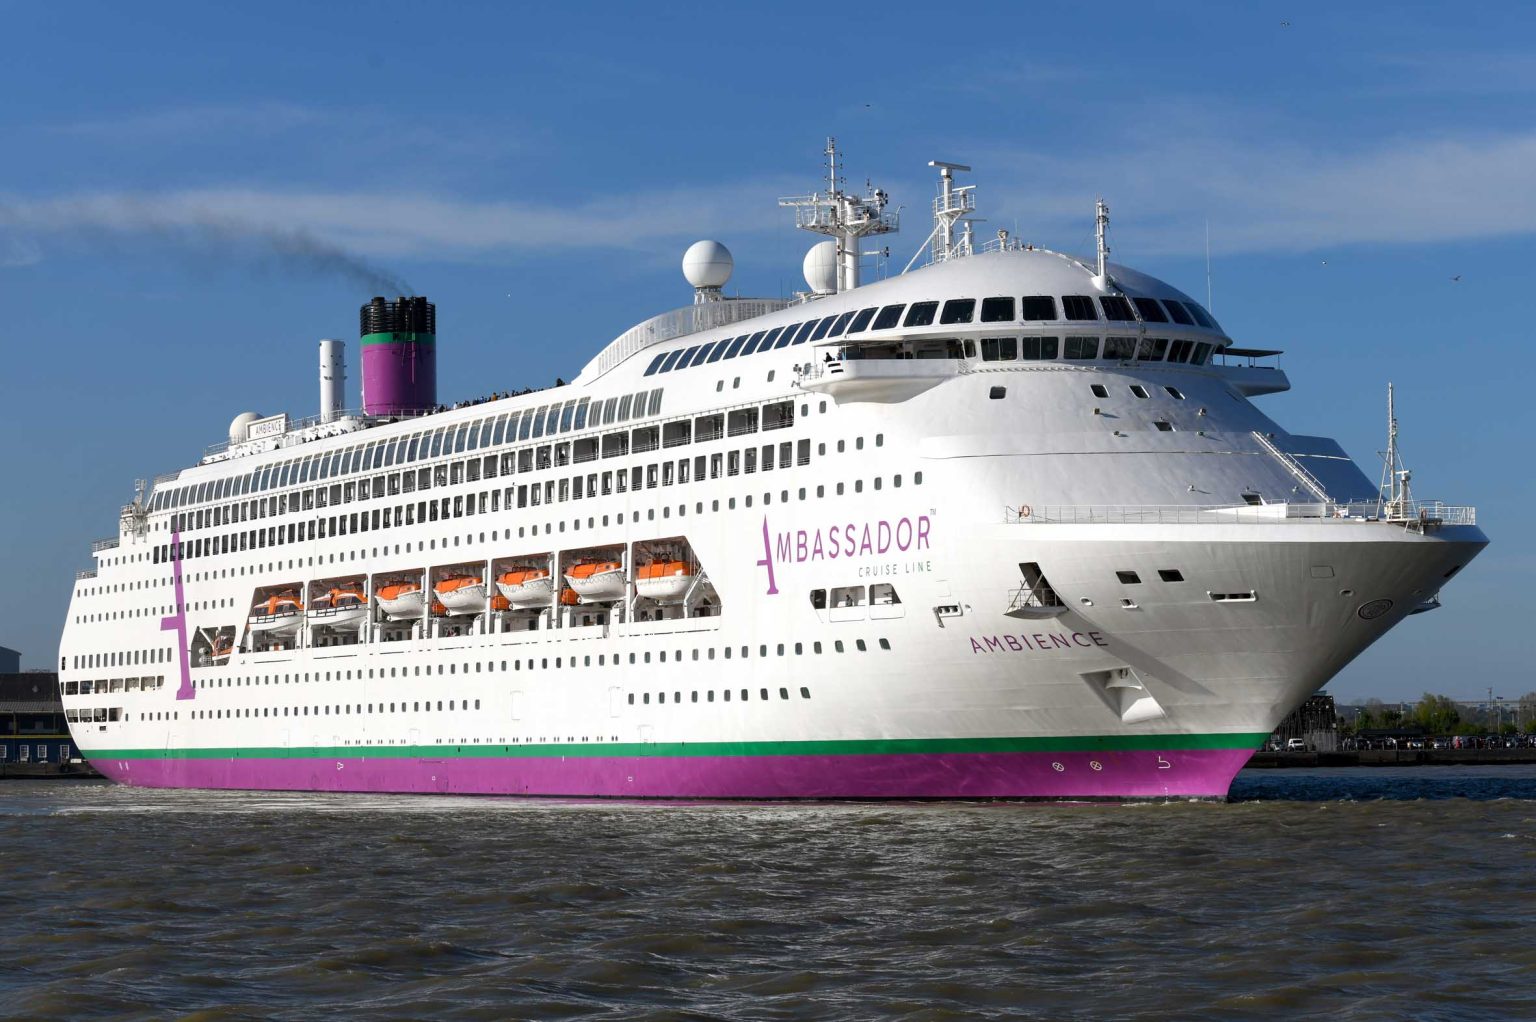 Ambience sets sail on her maiden fourday cruise from Tilbury Ships